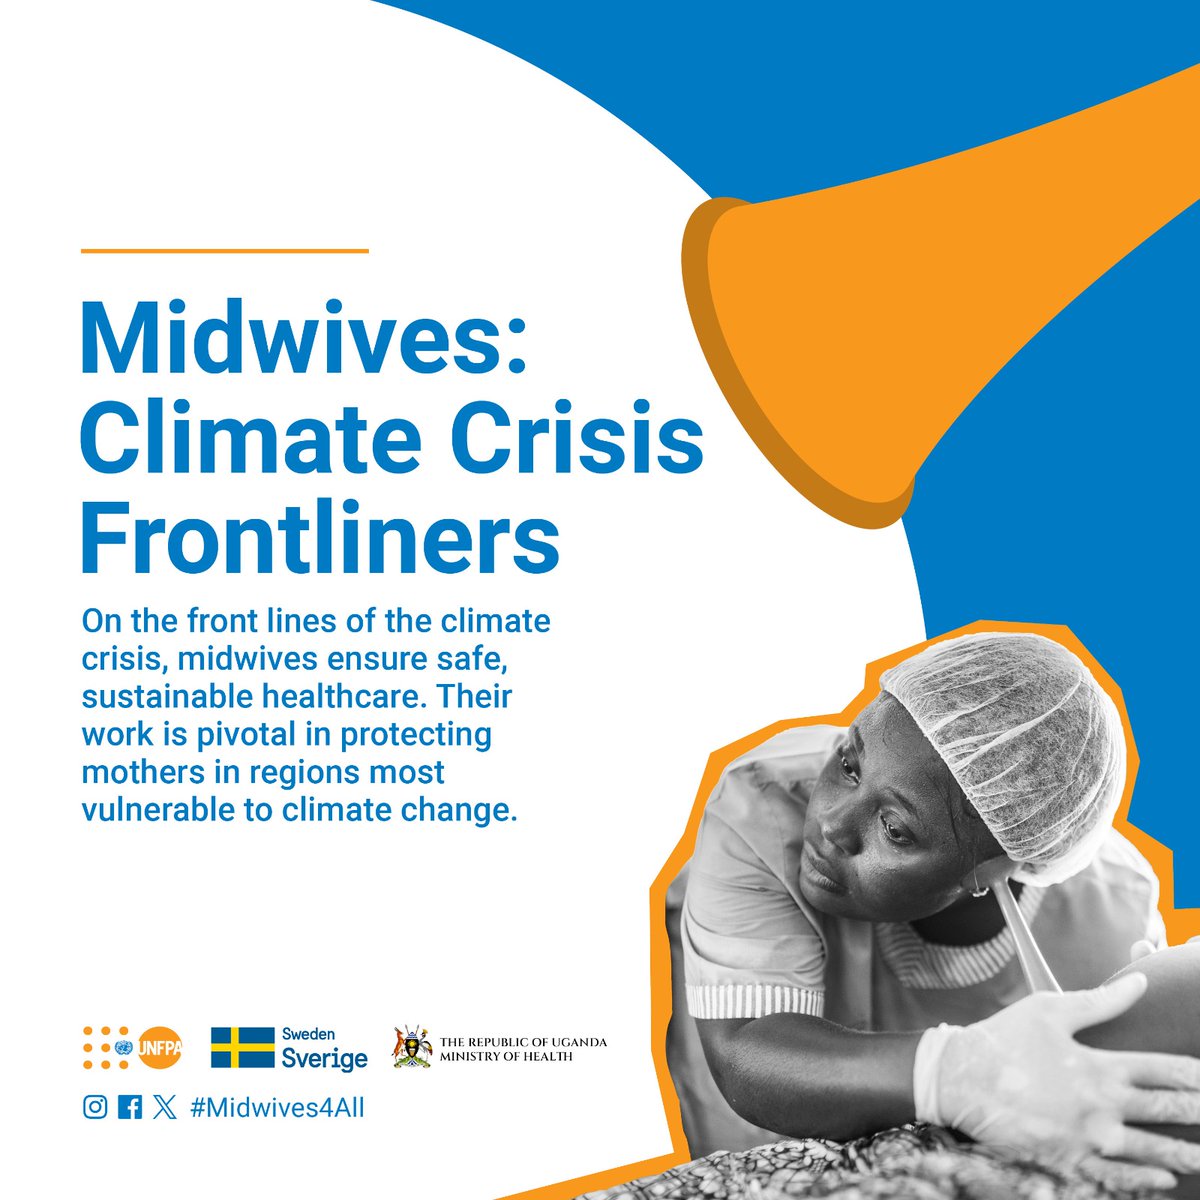 On the front lines of the climate crisis, midwives ensure safe, sustainable healthcare. Their work is pivotal in protecting mothers in regions most vulnerable to climate change.

They should be supported in any way.

#MidWives4All.
Cc: @UNFPAUganda.